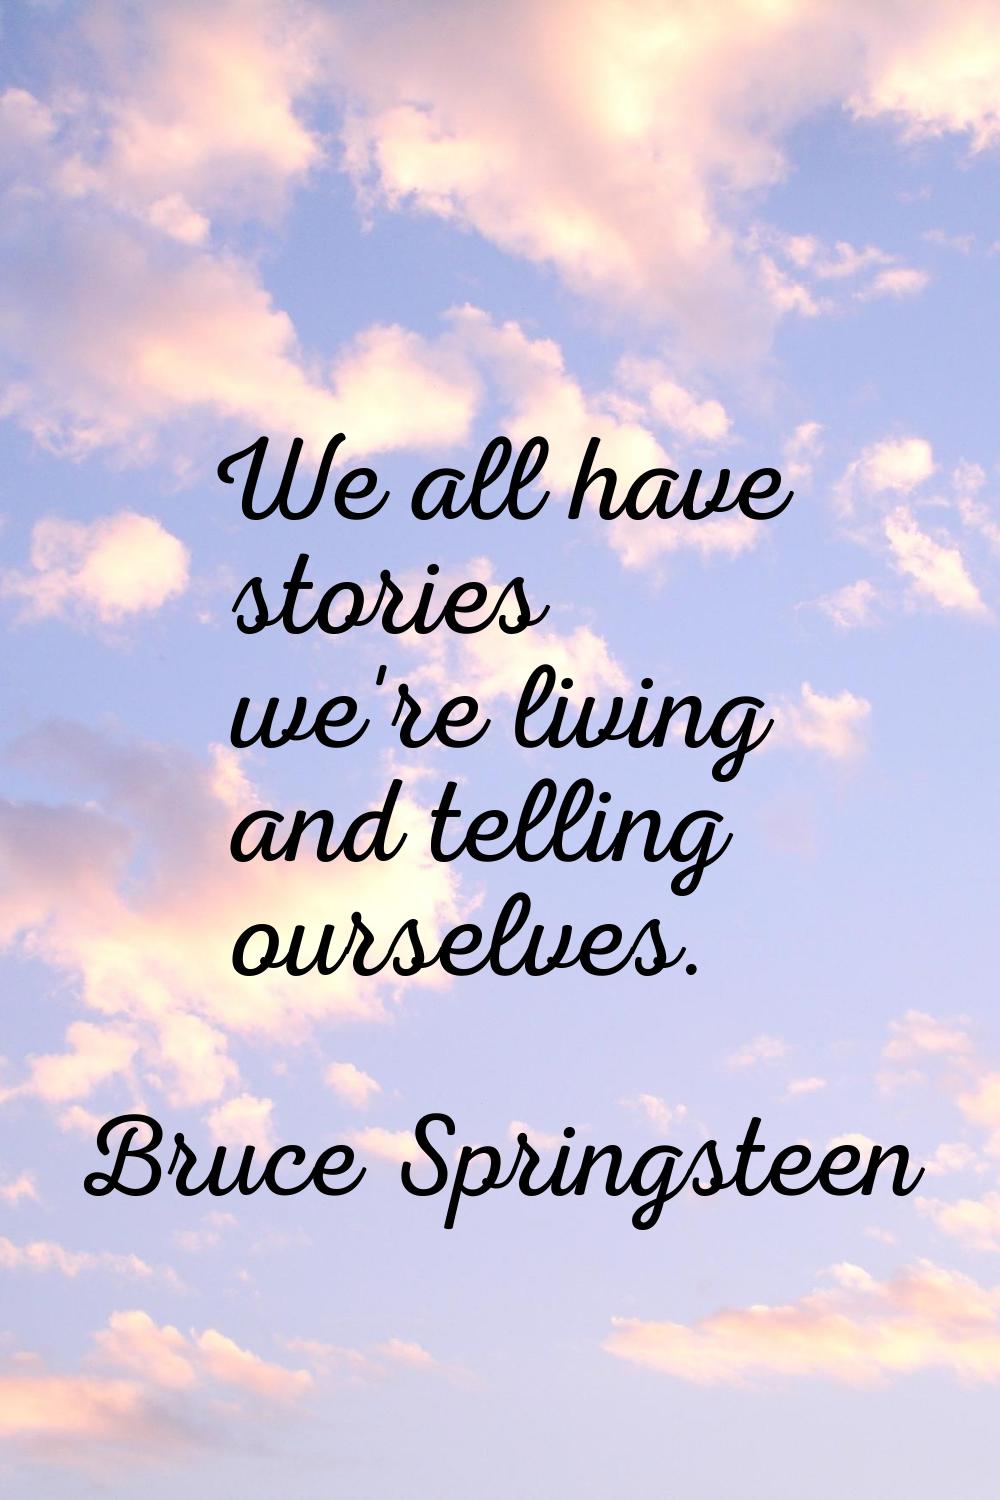 We all have stories we're living and telling ourselves.